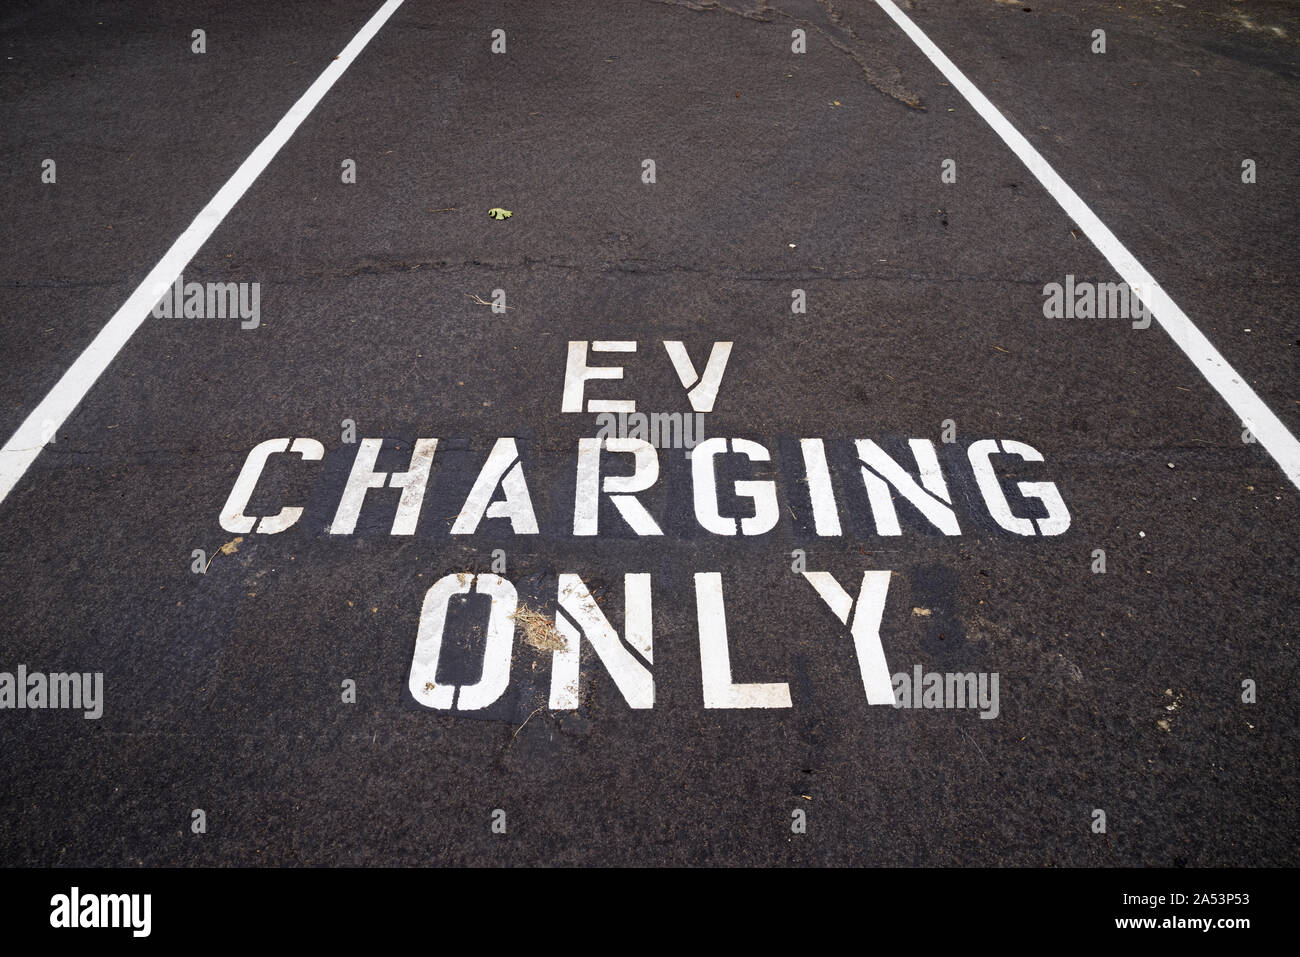 EV charging only written in white on the dark pavement of an electric vehicle charging space Stock Photo